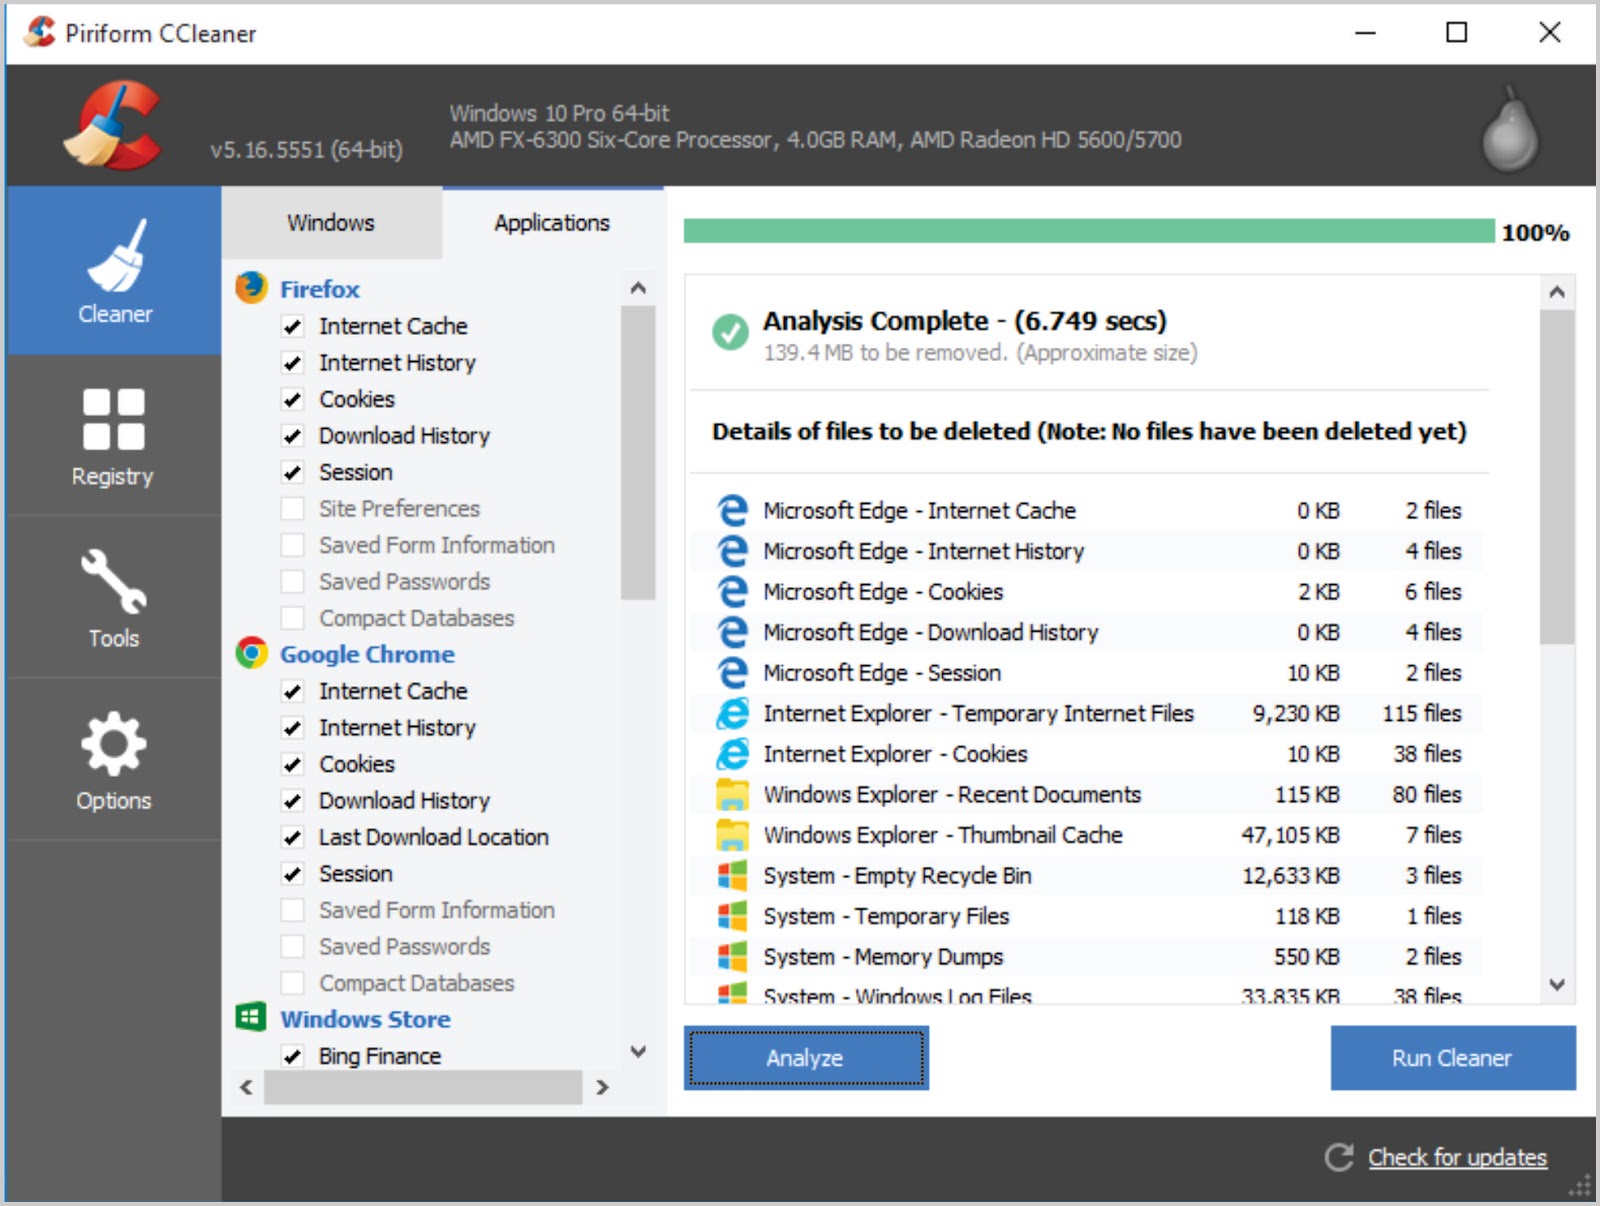 ccleaner professional free 2017